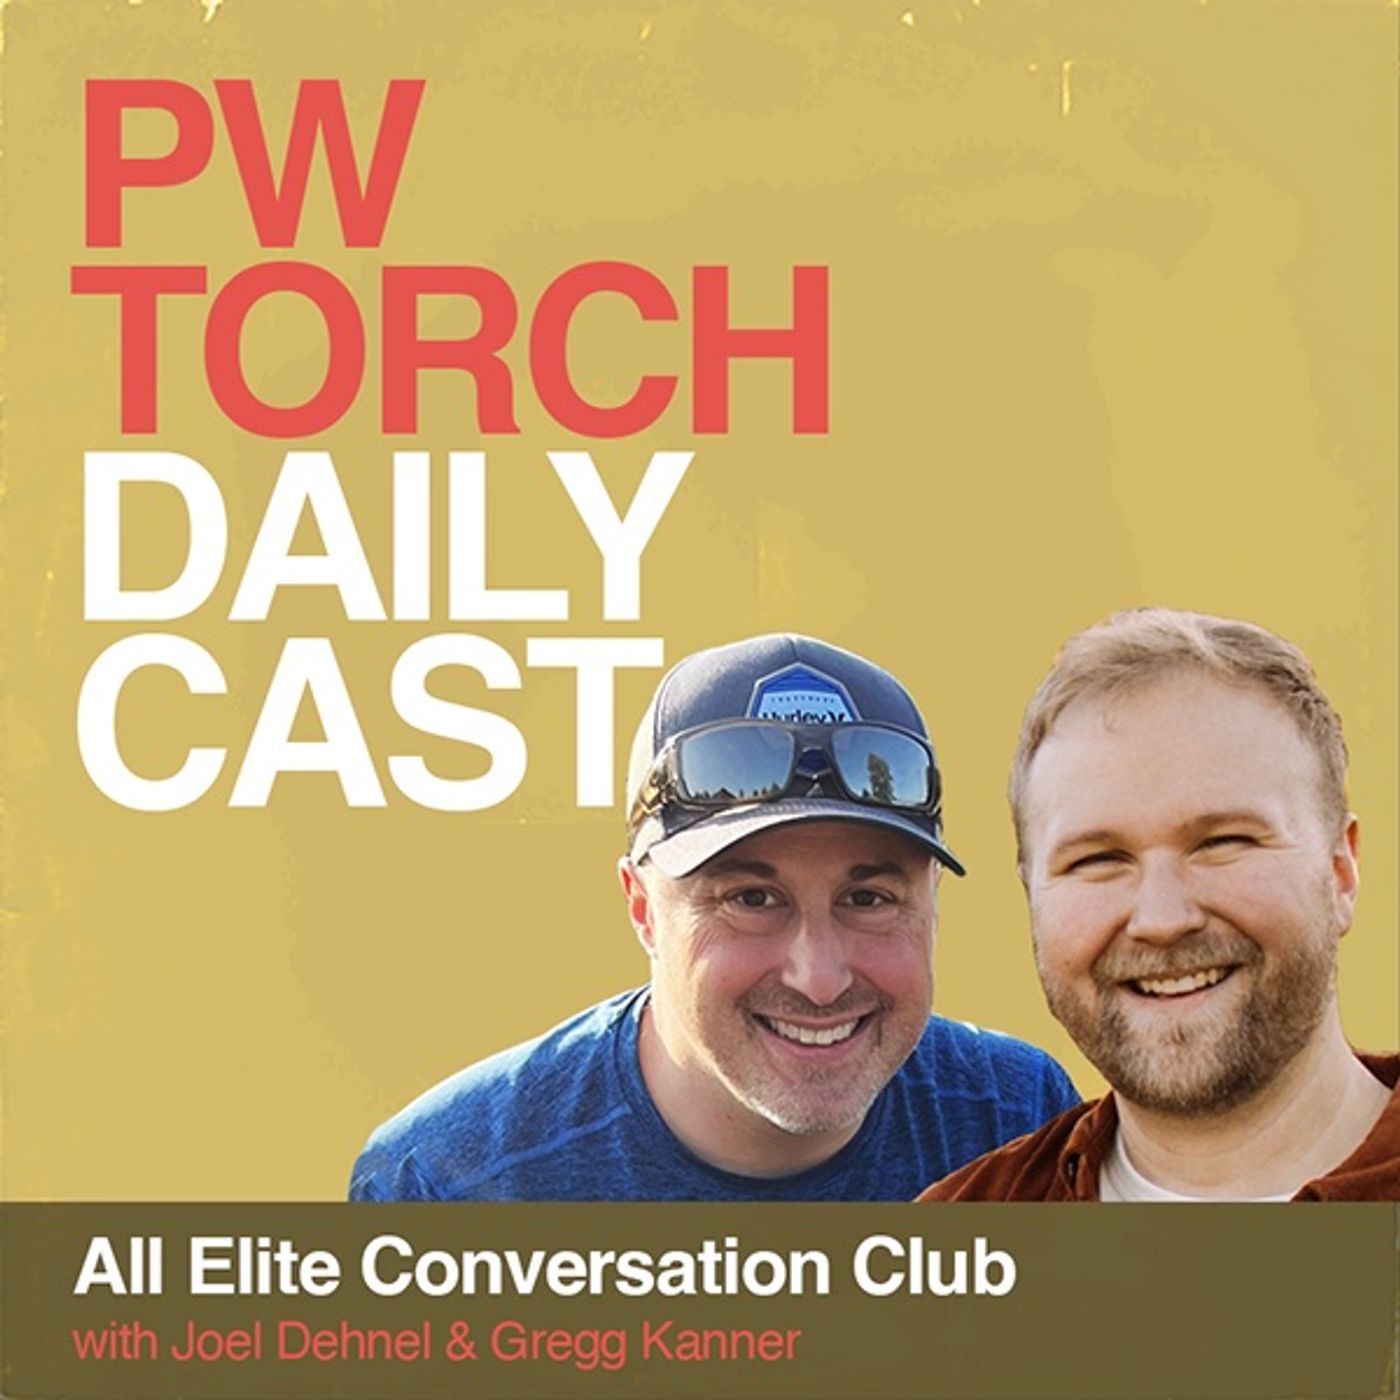 All Elite Conversation Club - Dehnel & Kanner talk Okada giving notice to New Japan and possibility of joining AEW full time, Dynamite, more